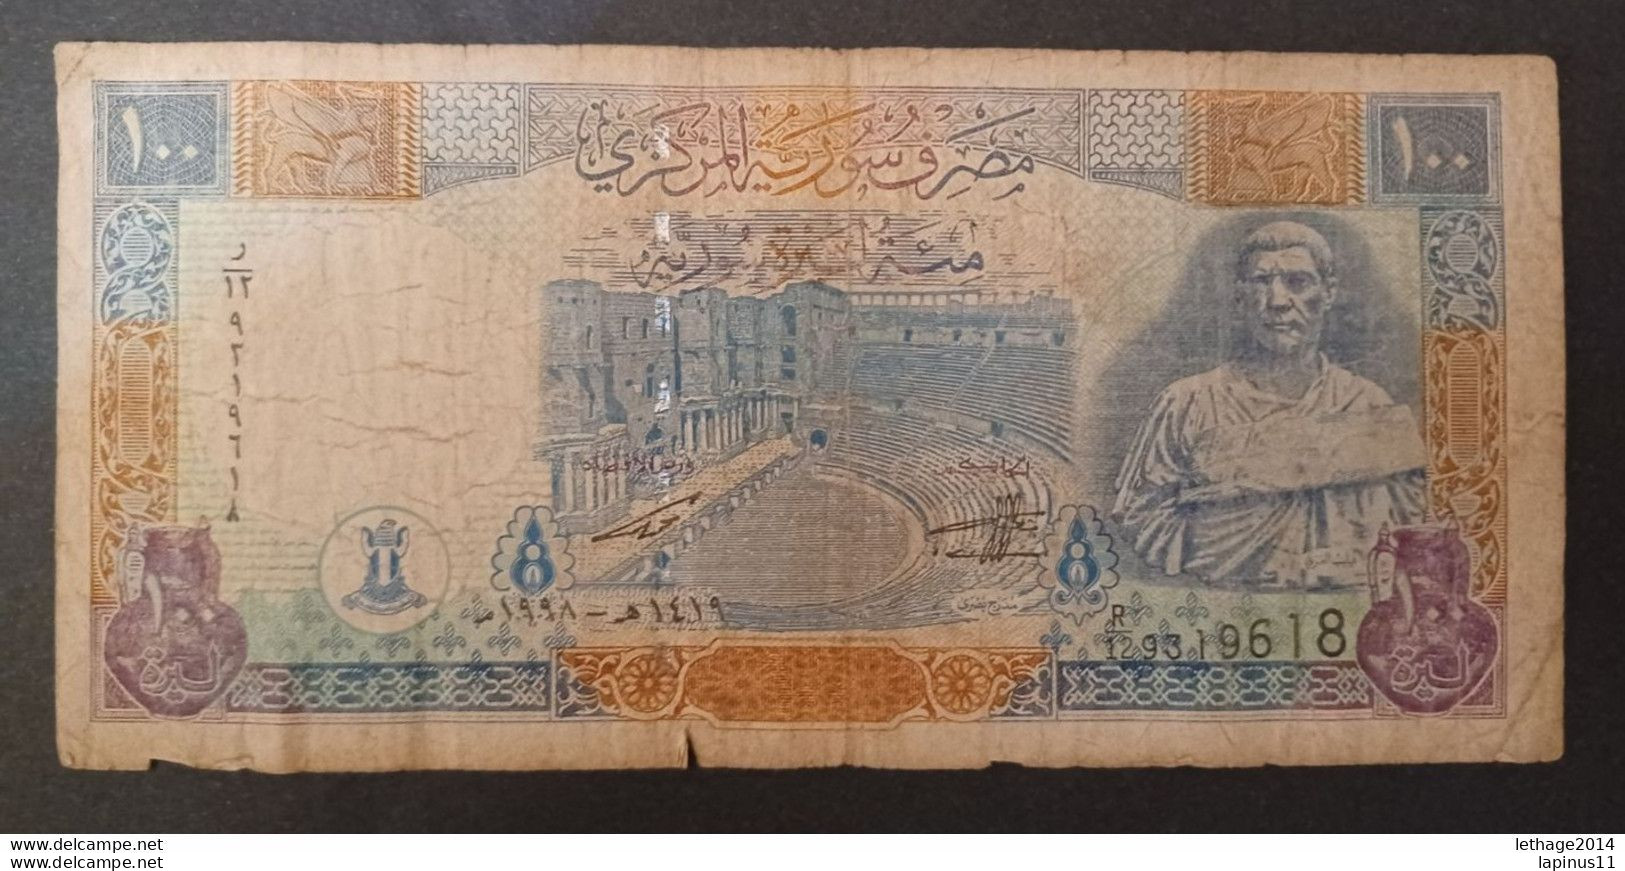 BANKNOTE سوريا SYRIA 100 POUNDS ALEPPO 1998 CIRCULATED - Syrien